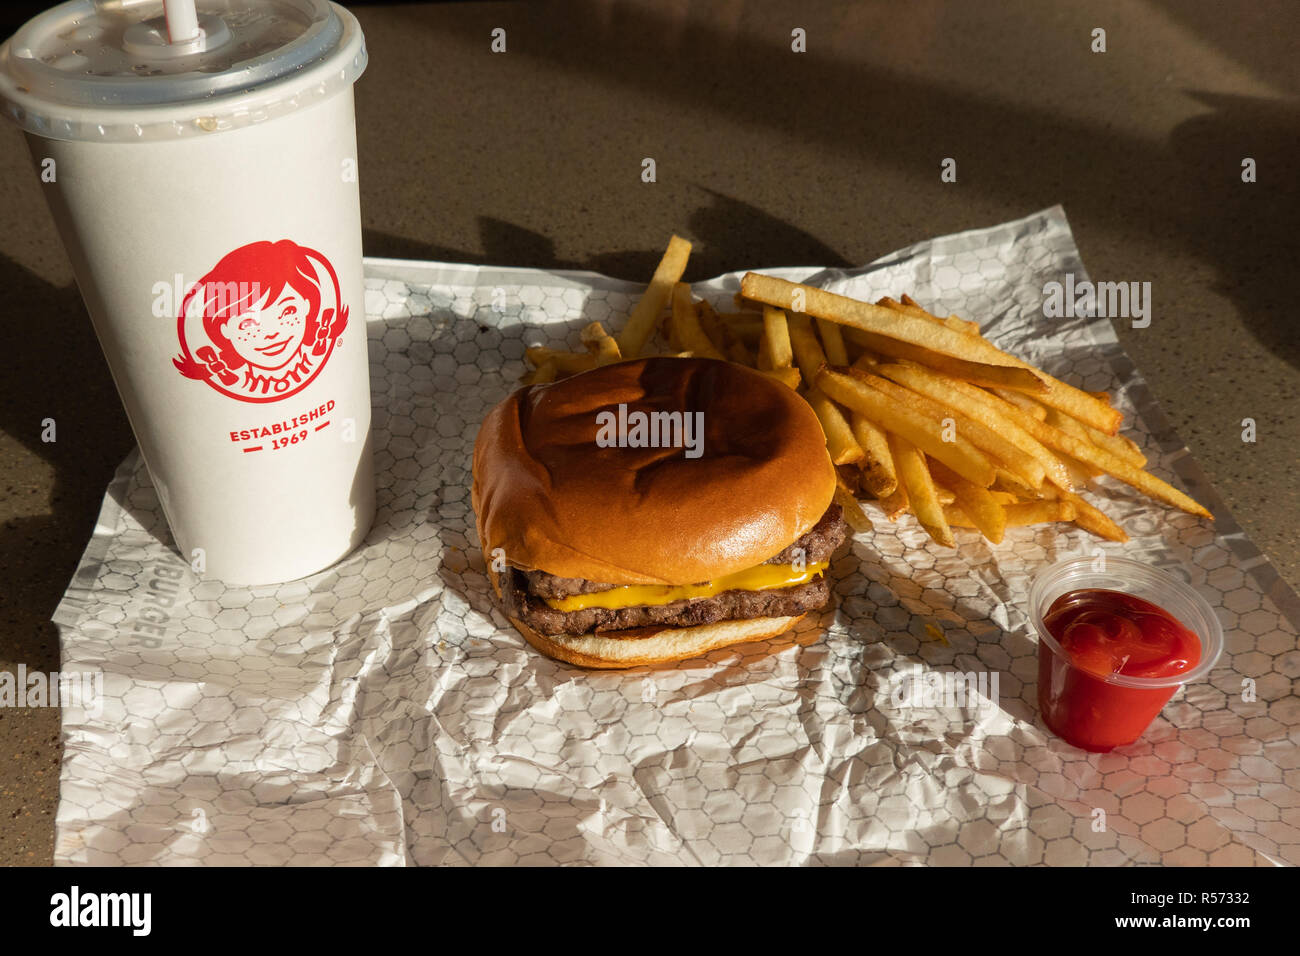 A Wendy's Dave's Double cheeseburger combo, consisting of a double cheeseburger, fries, and a beverage at their location in Amsterdam, NY USA Stock Photo